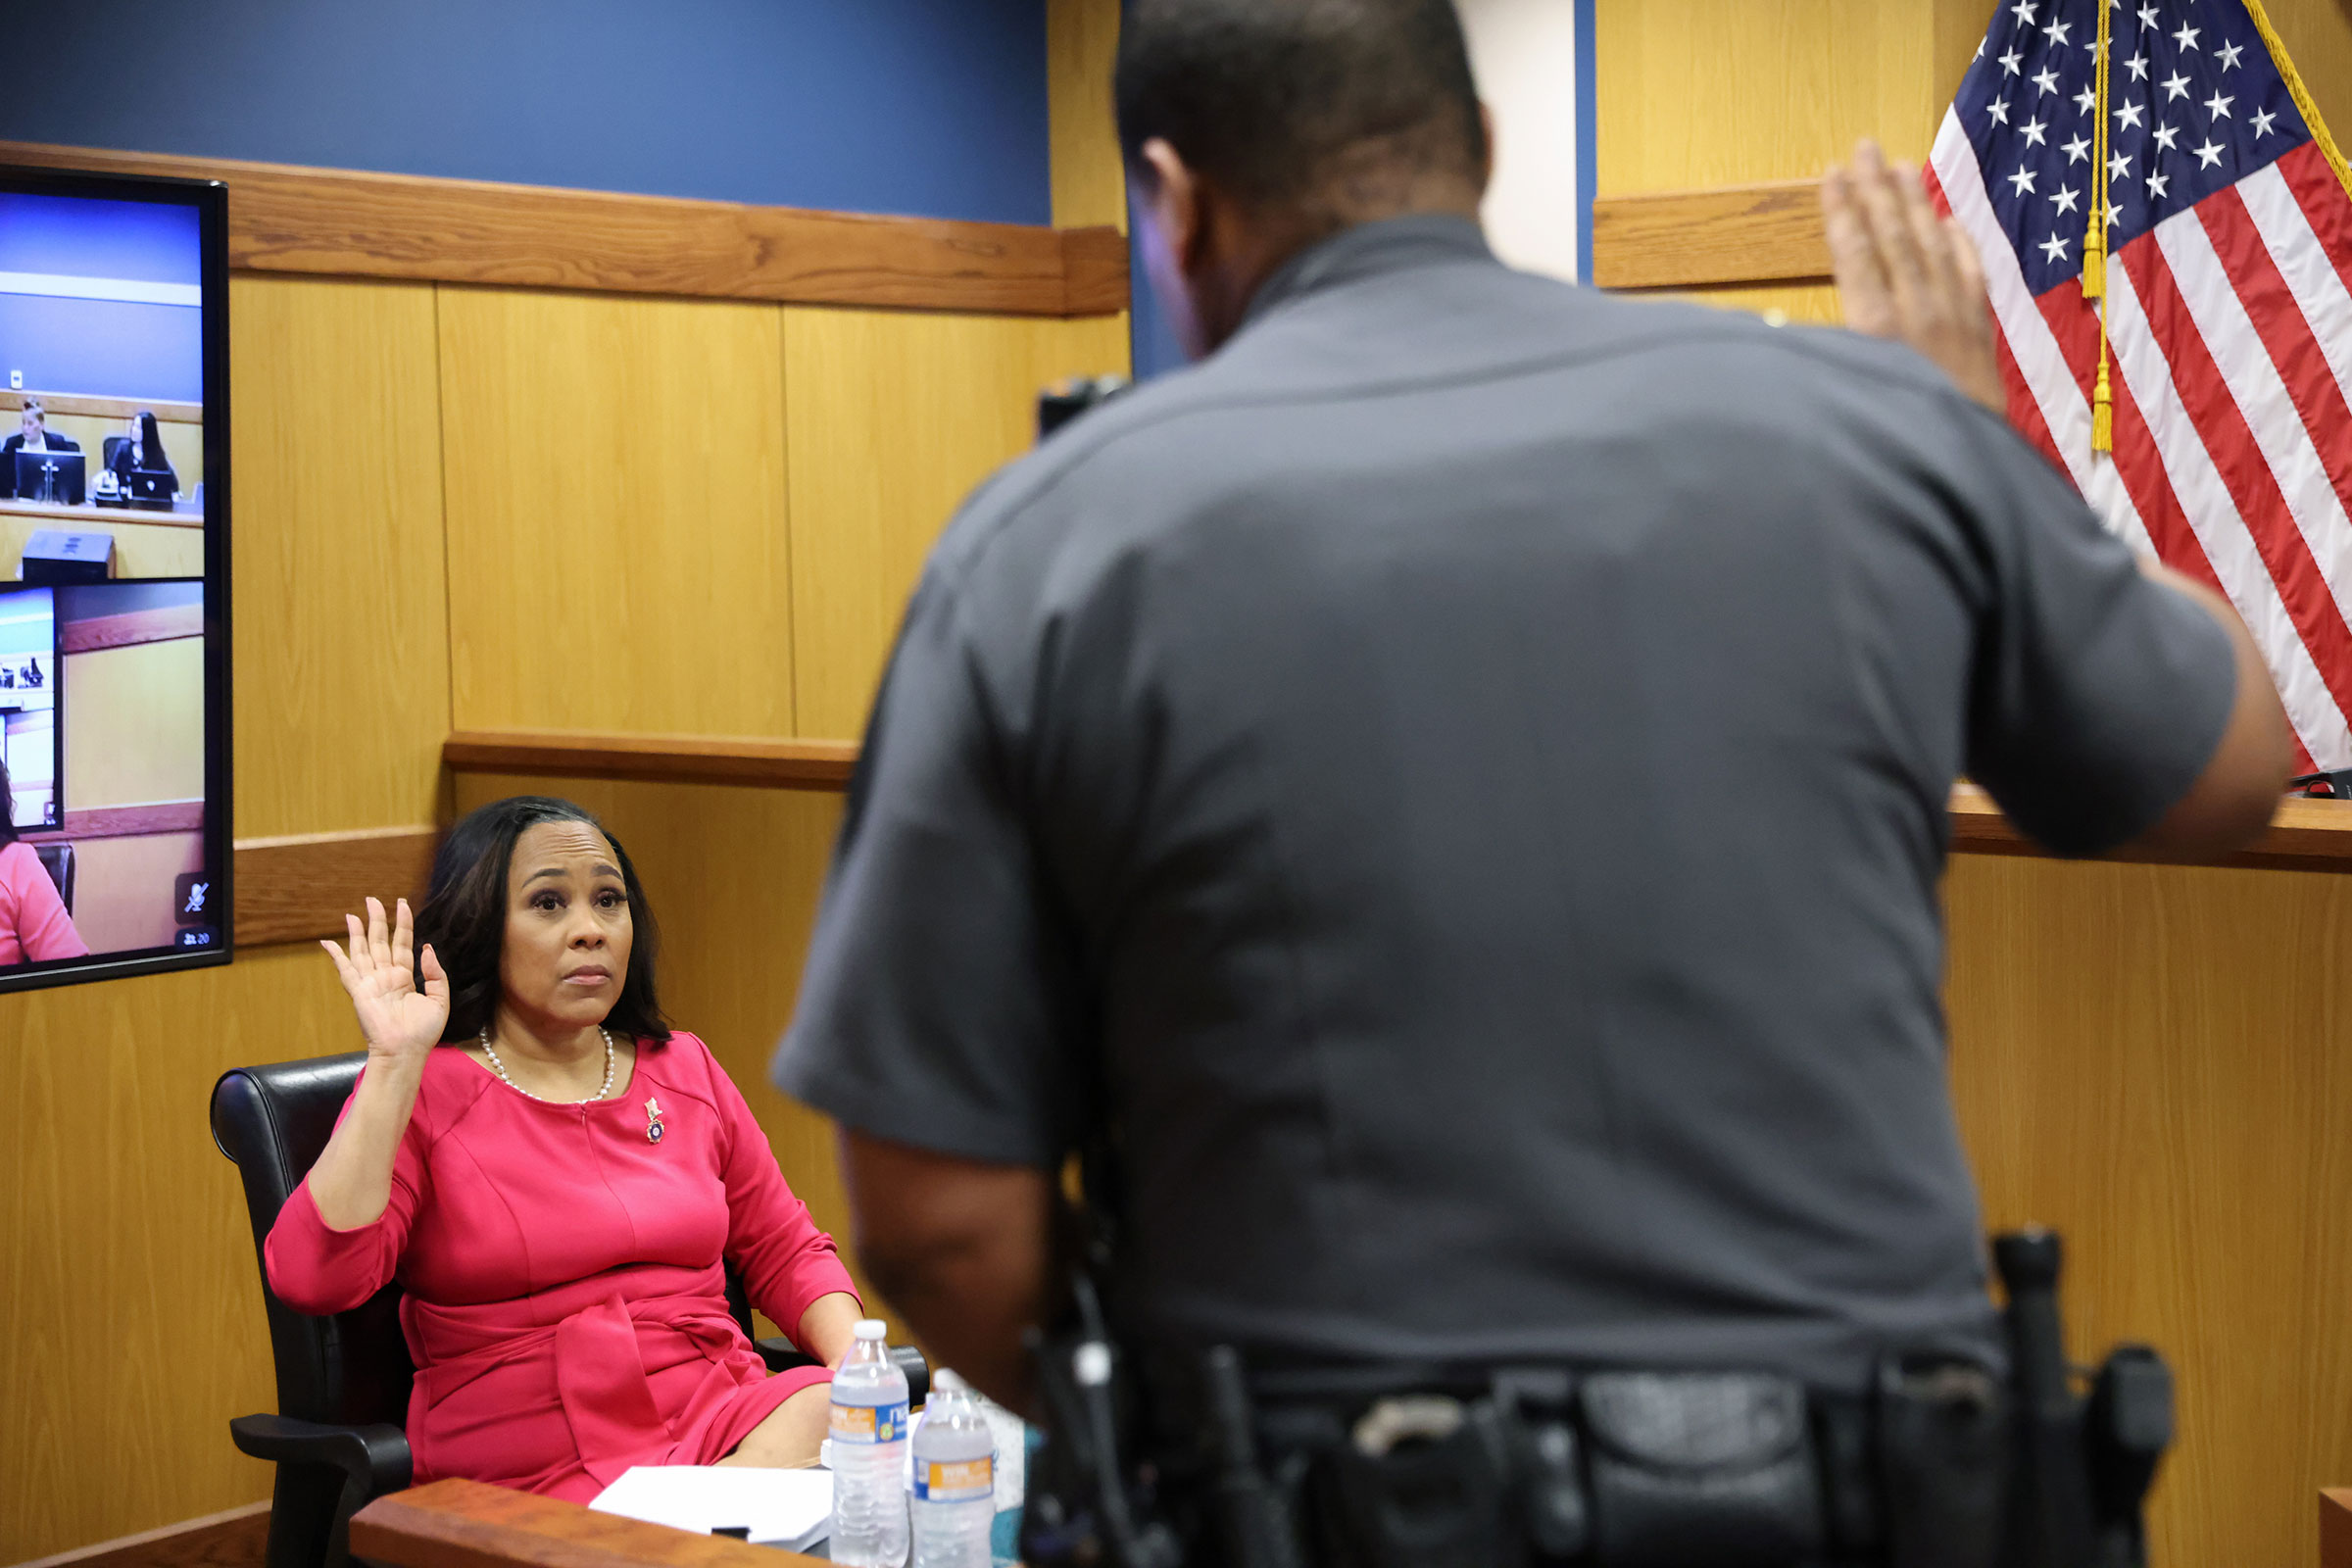 Fulton County District Attorney Fani Willis is sworn in to testify during a hearing in the case of the State of Georgia v. Donald John Trump at the Fulton County Courthouse on February 15 in Atlanta.